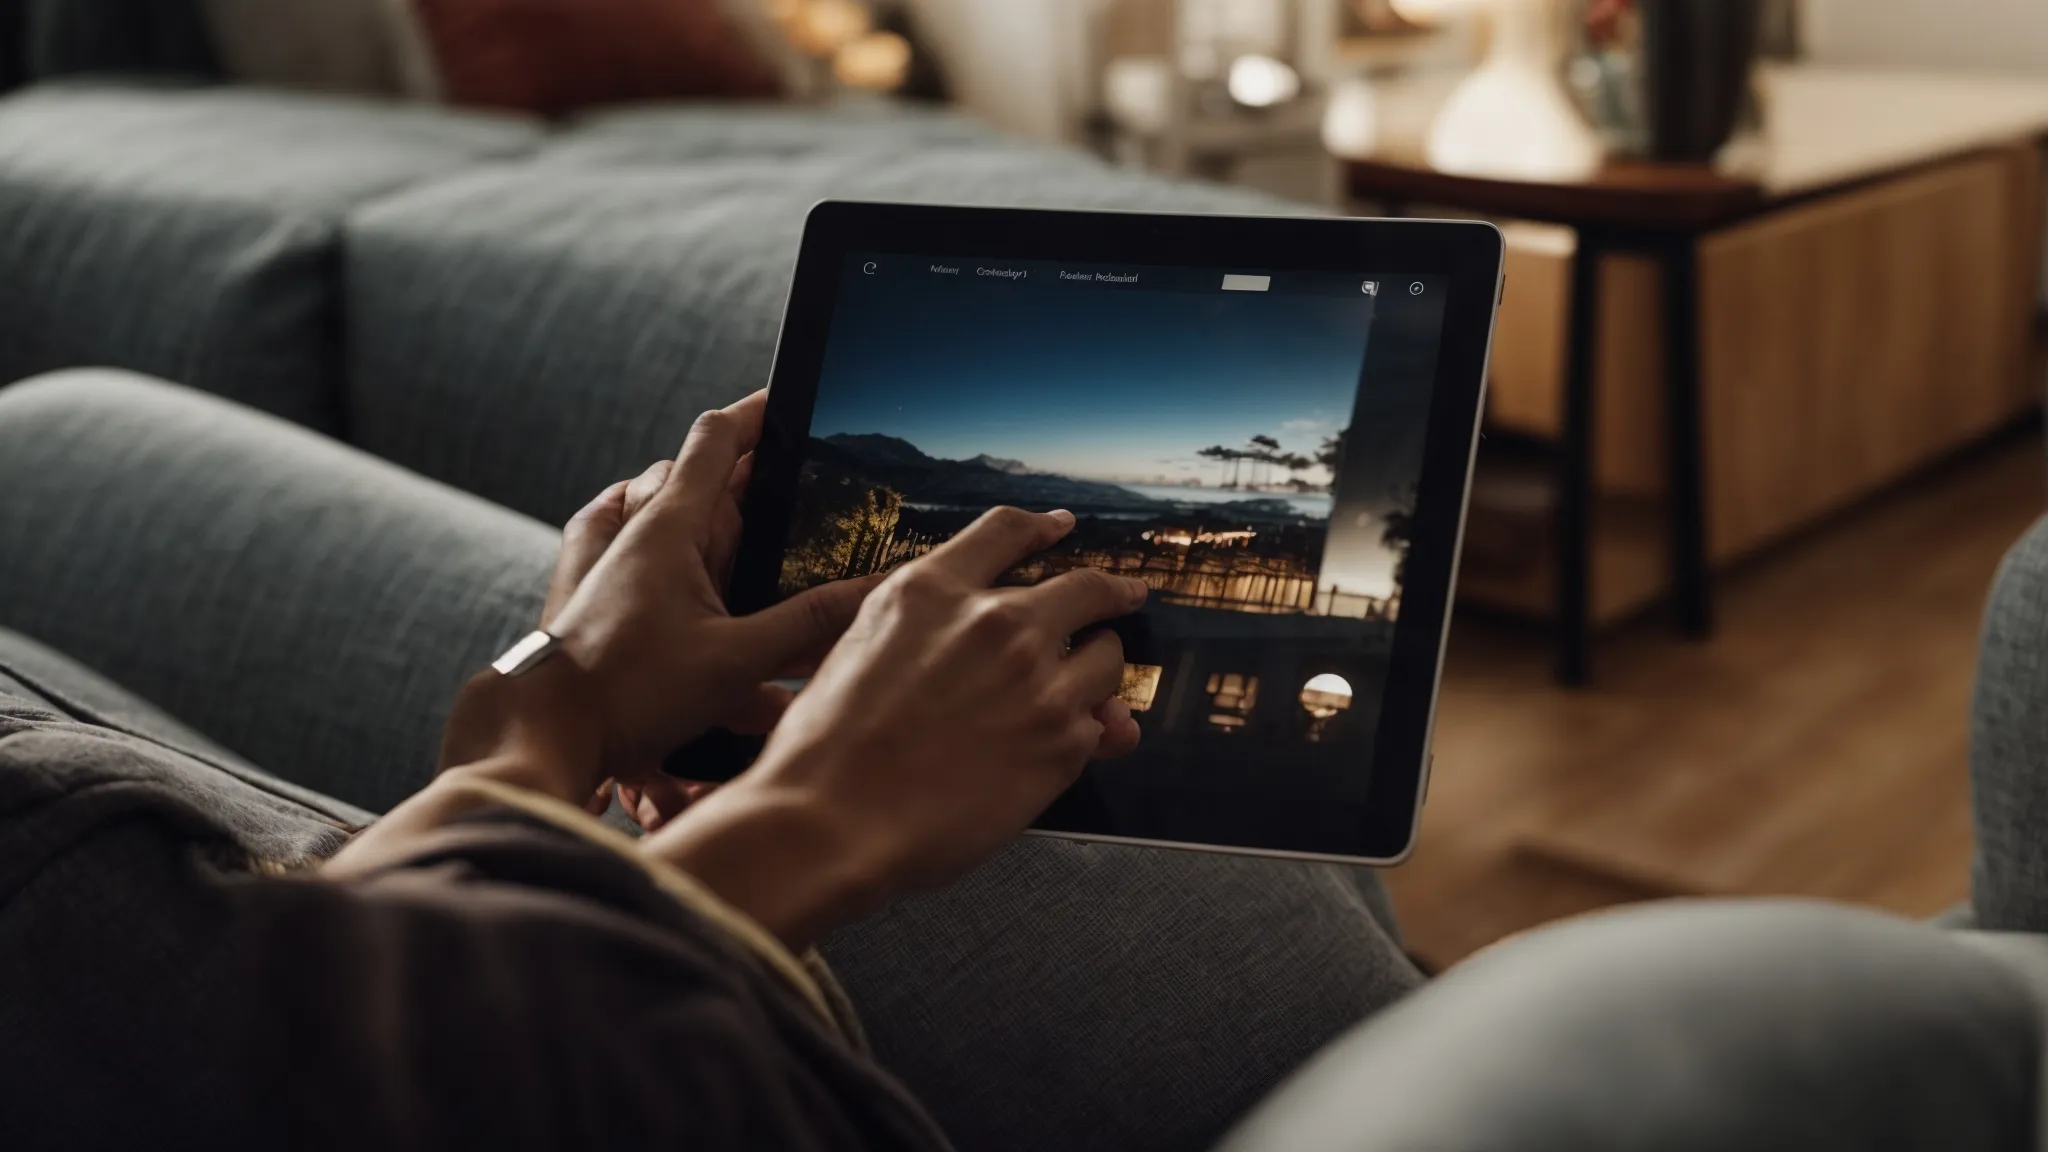 a person leisurely swiping through an image carousel on a modern, sleek tablet while lounging on a couch.